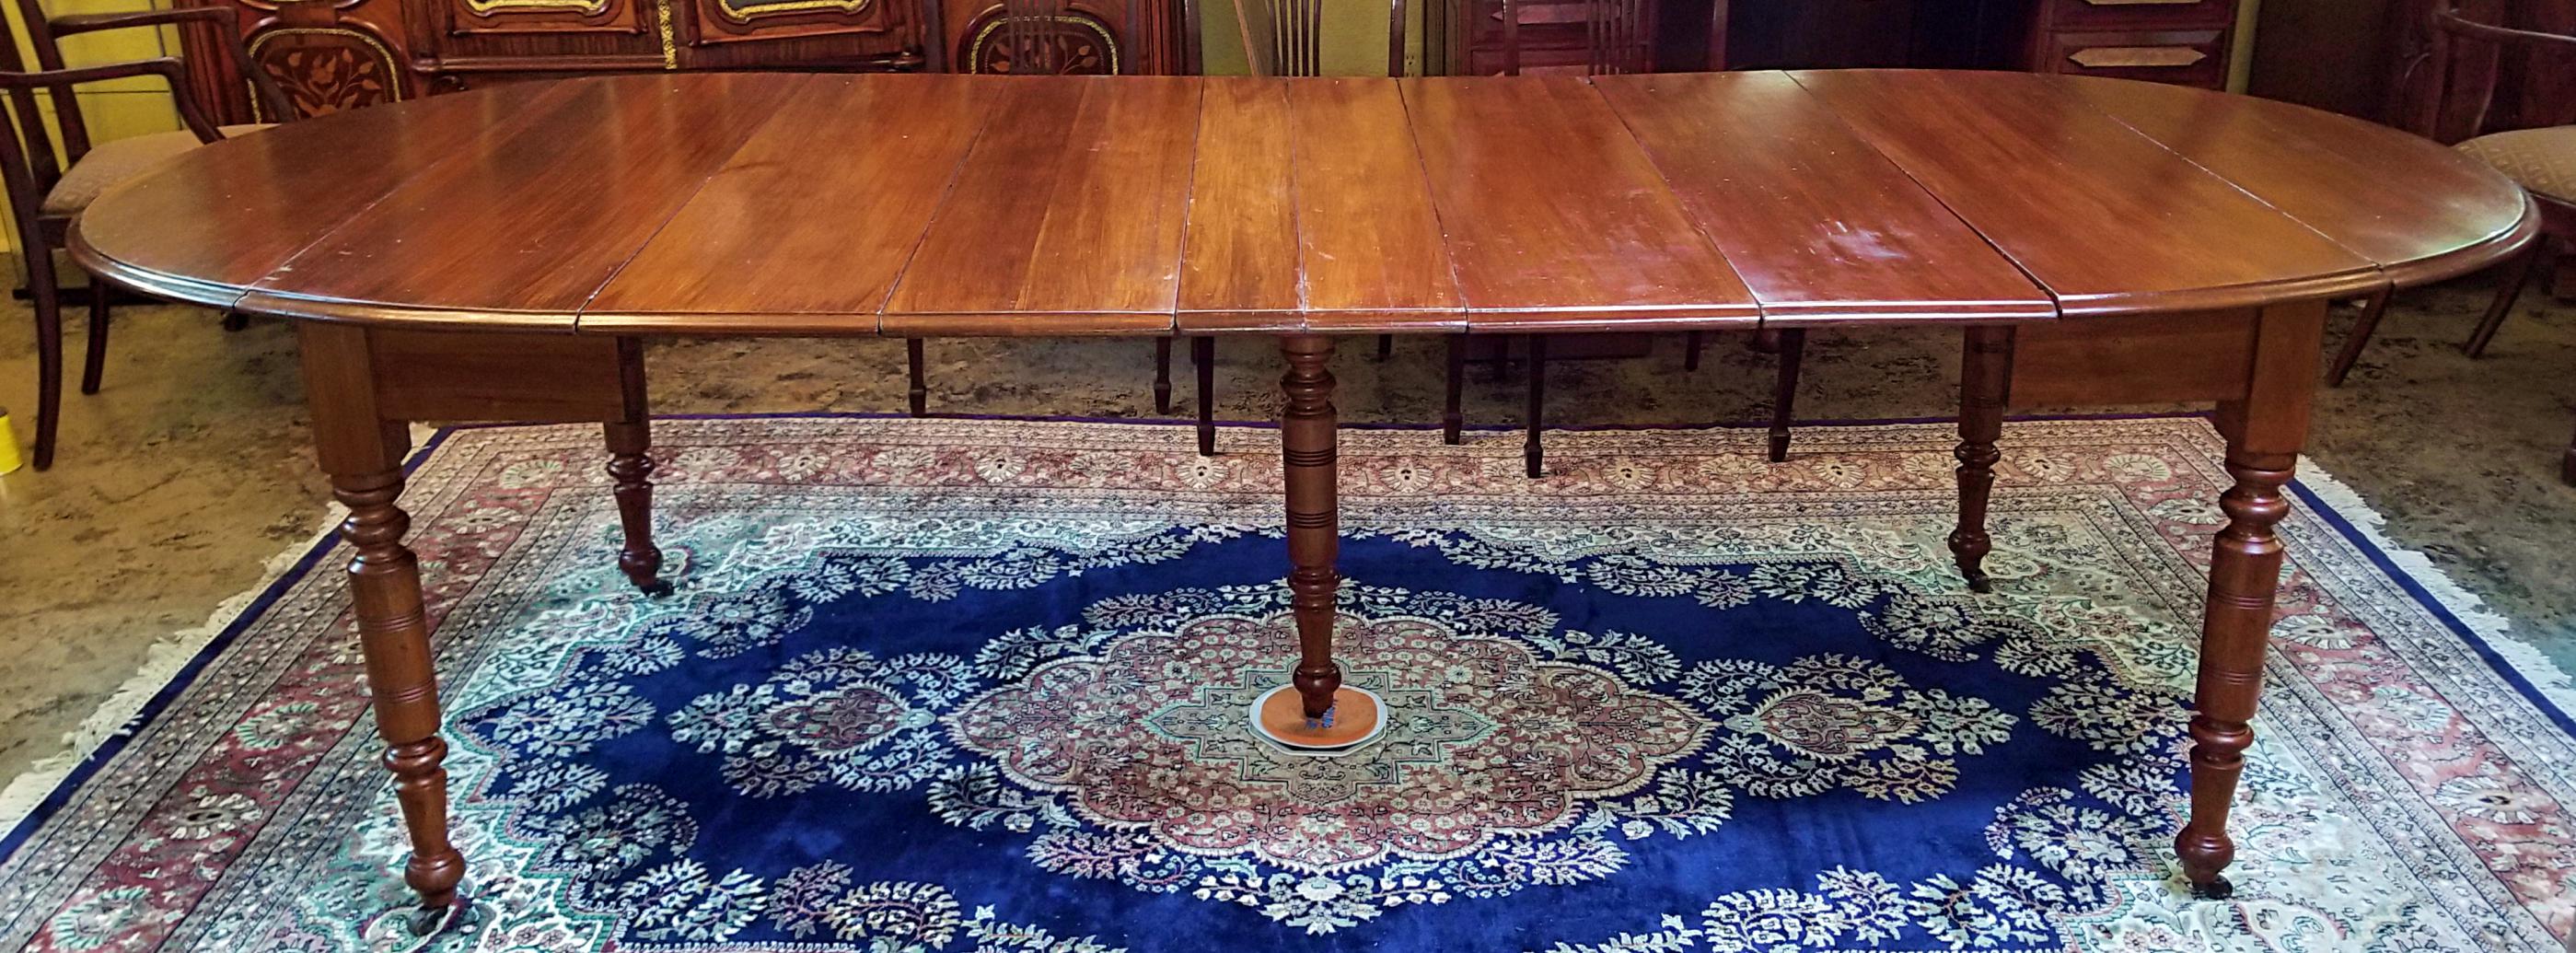 early american dining table